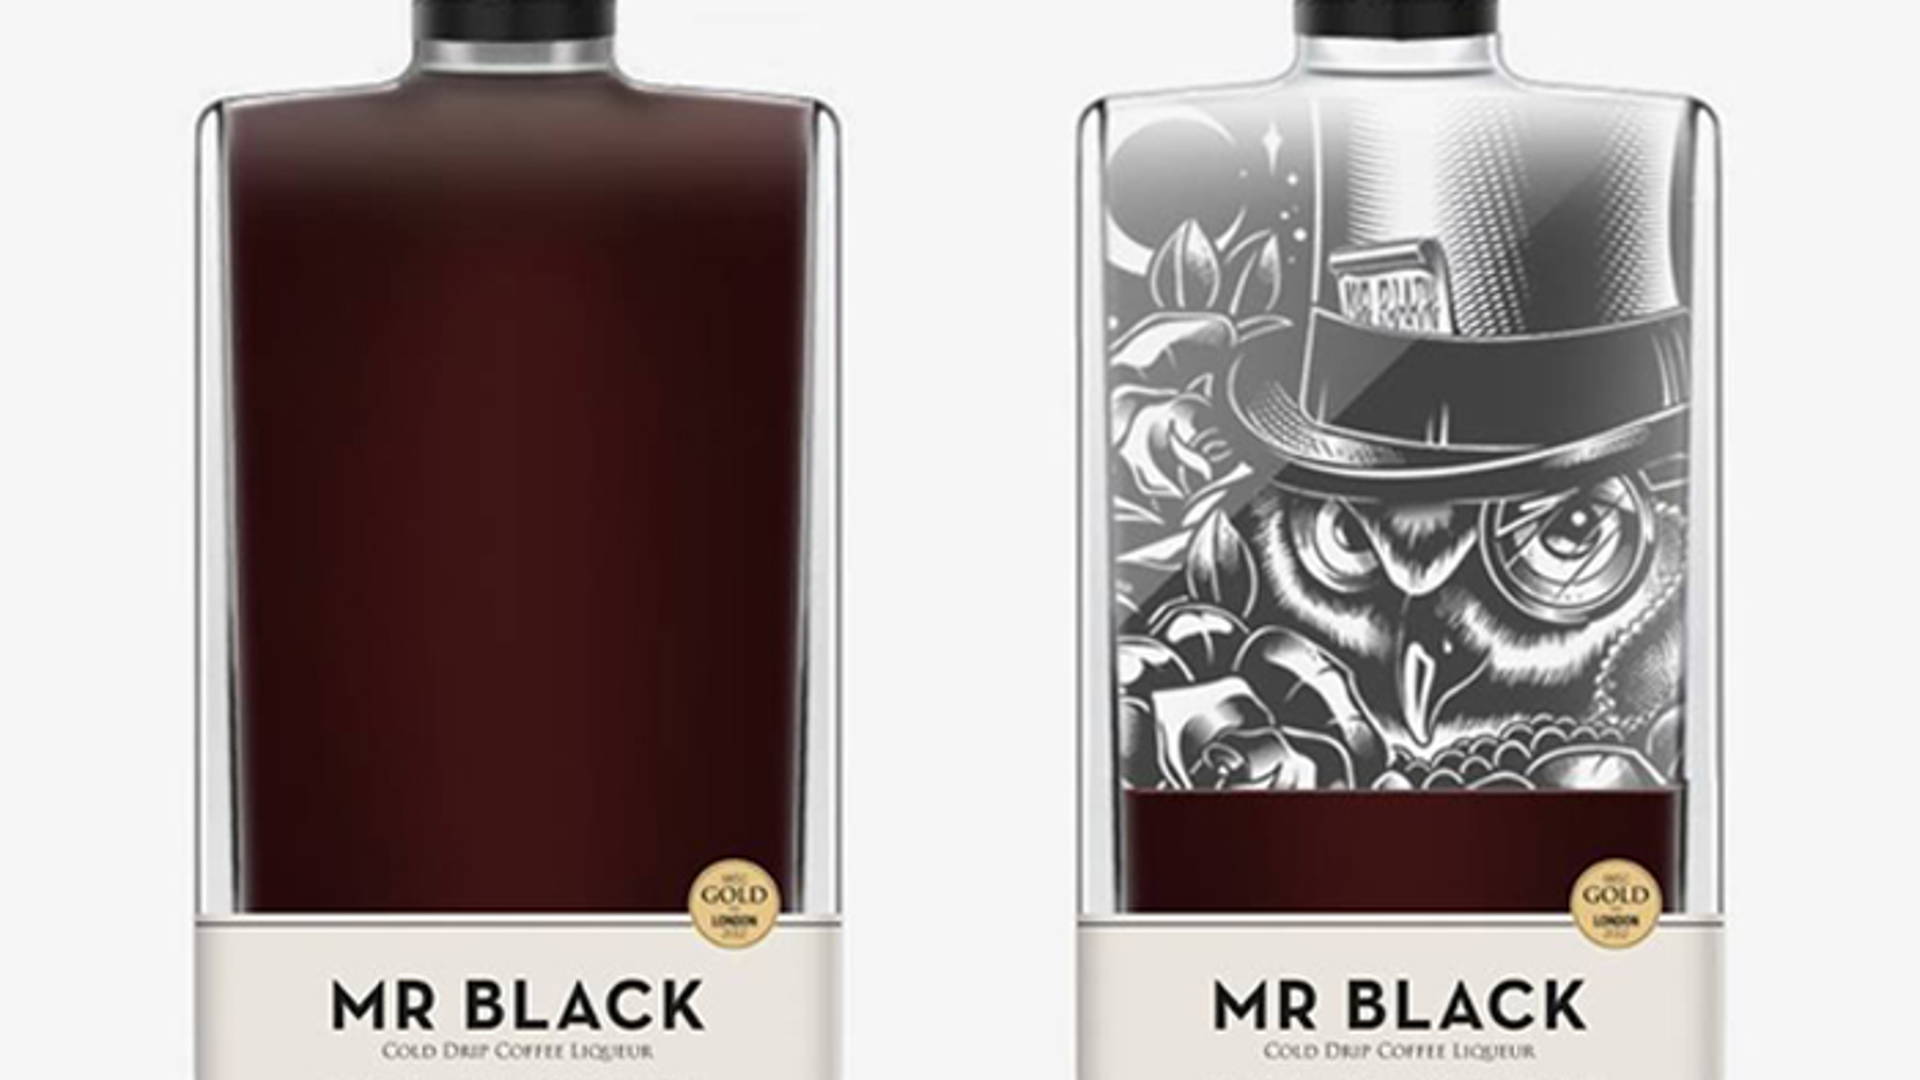 Featured image for MR BLACK Cold Drip Coffee Liqueur